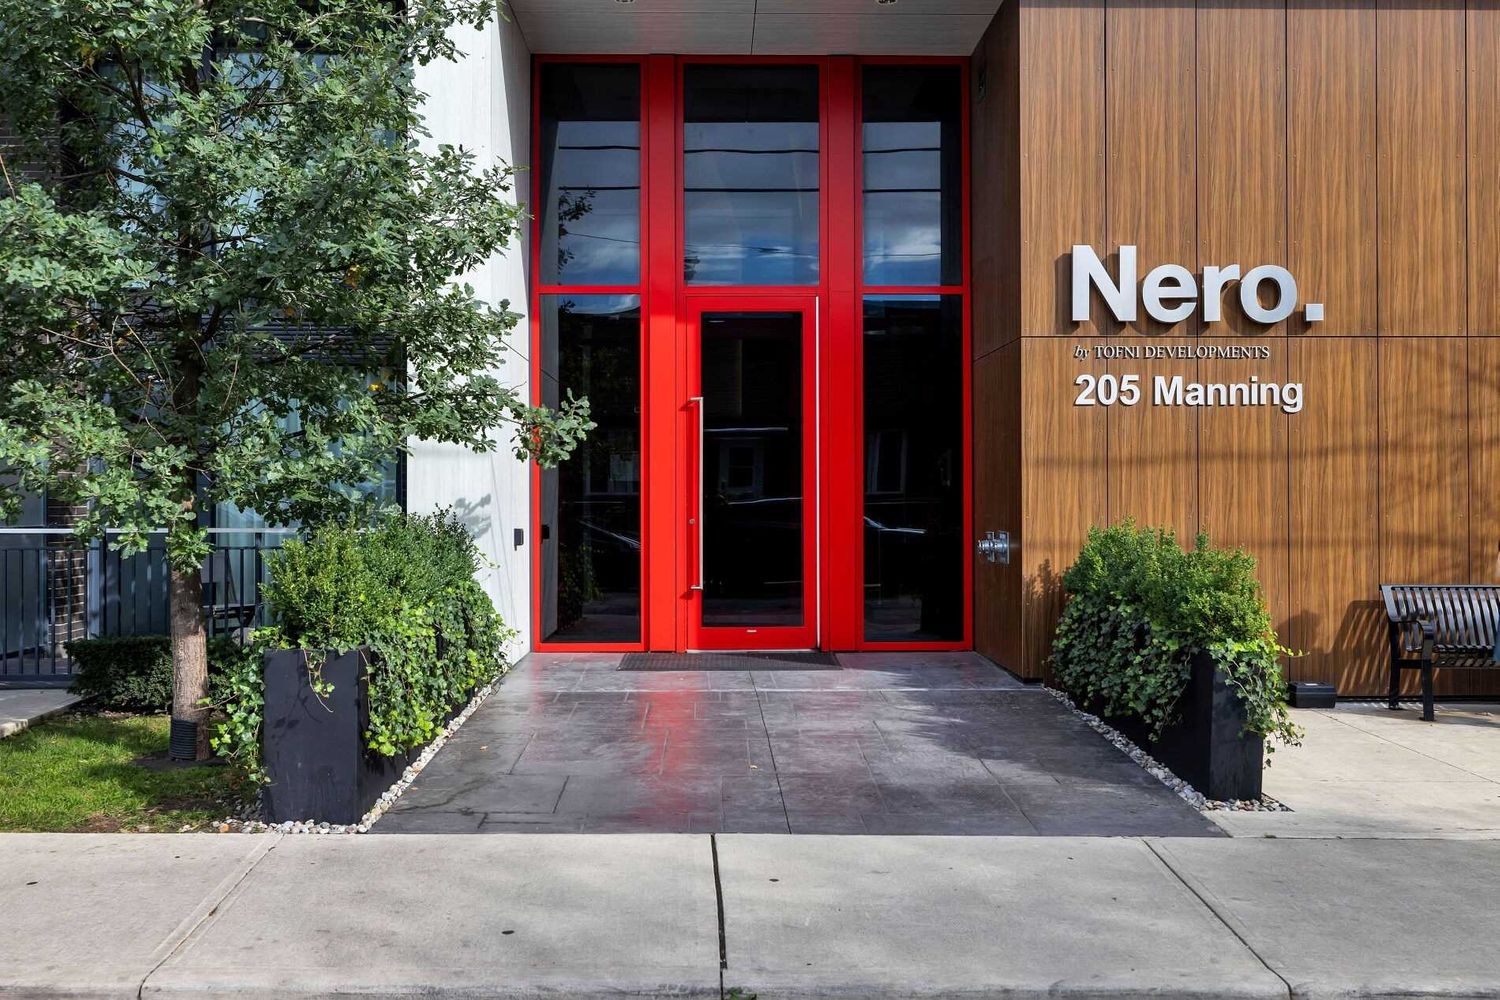 205 Manning Avenue. Nero. is located in  West End, Toronto - image #3 of 3